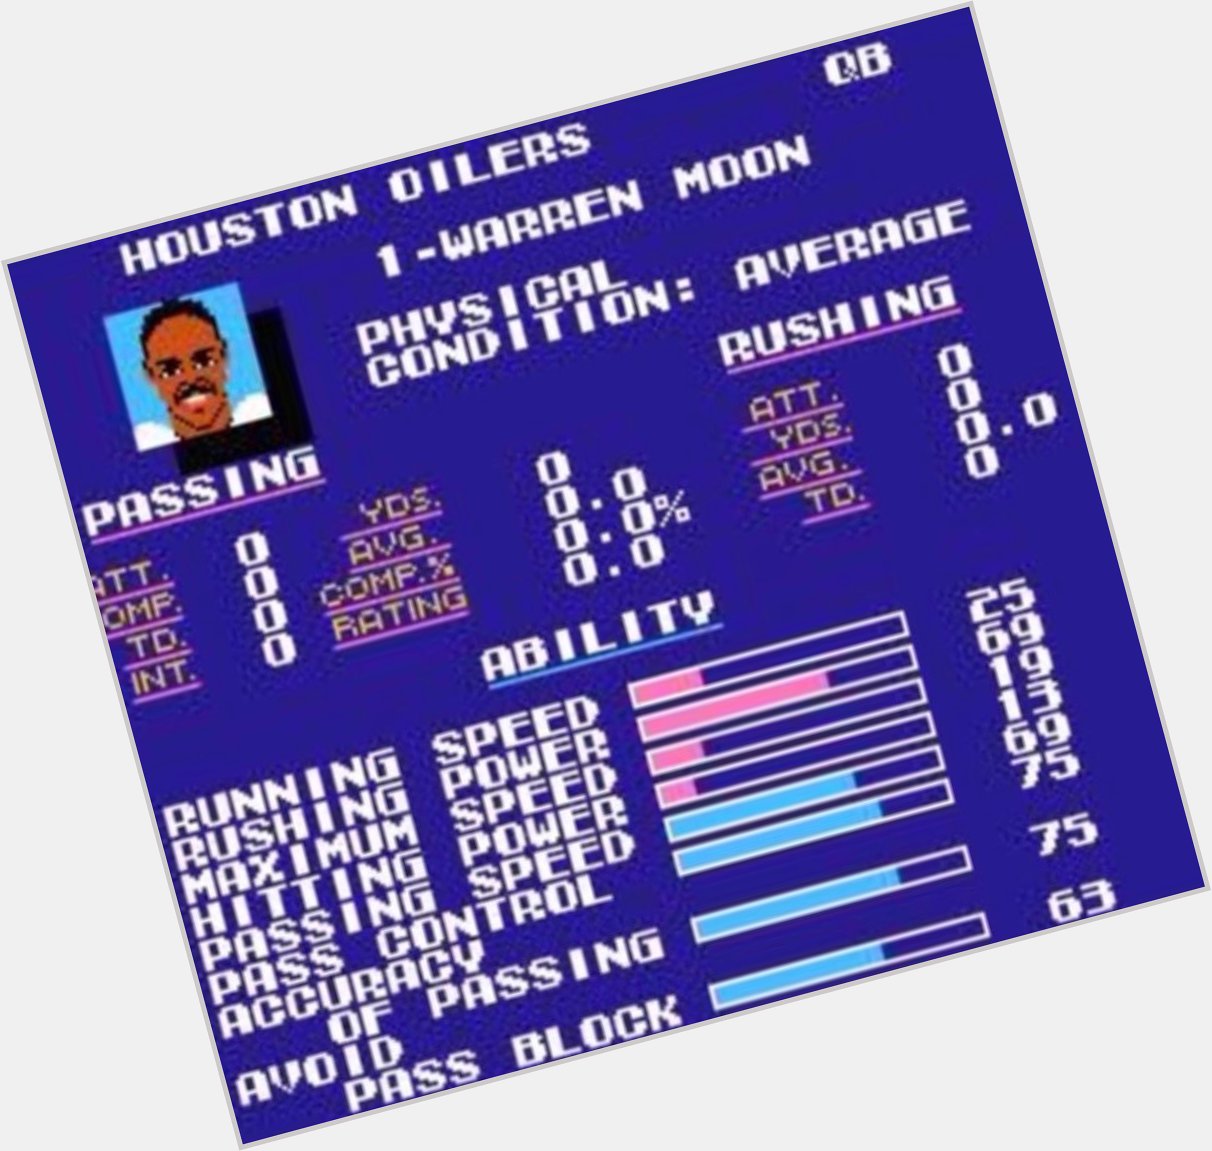 Happy 65th Birthday to Warren Moon. Also, Tecmo Super Bowl was ahead of its time, with ability numbers 